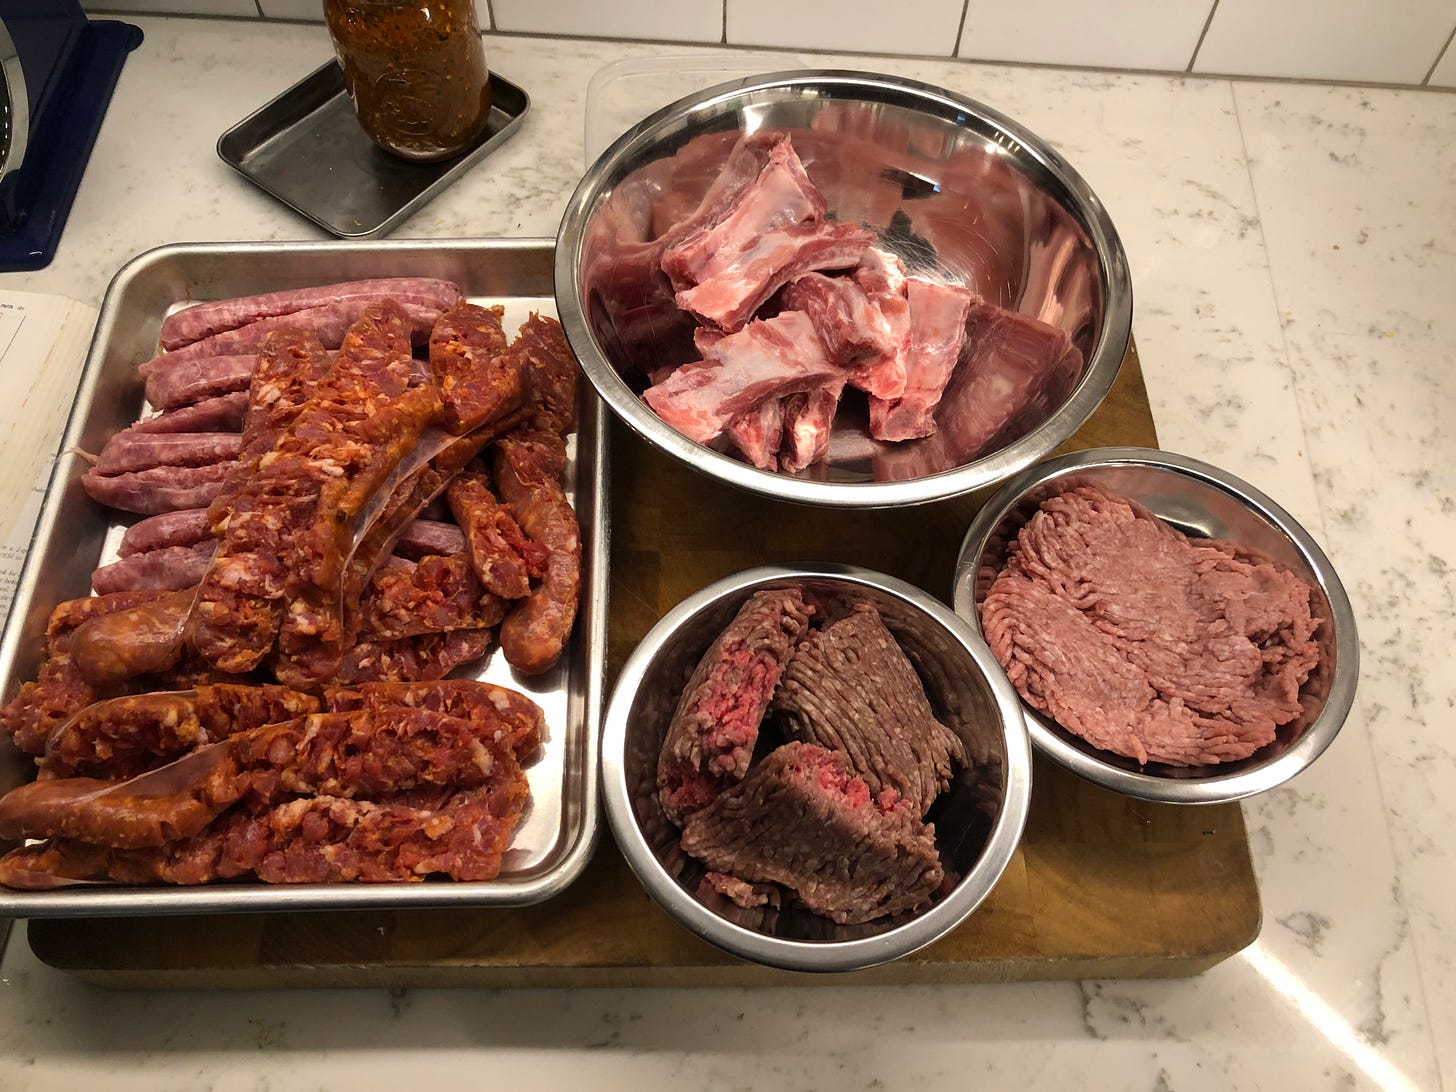 An arrangement of  sausages, ribs, ground beef, and ground pork